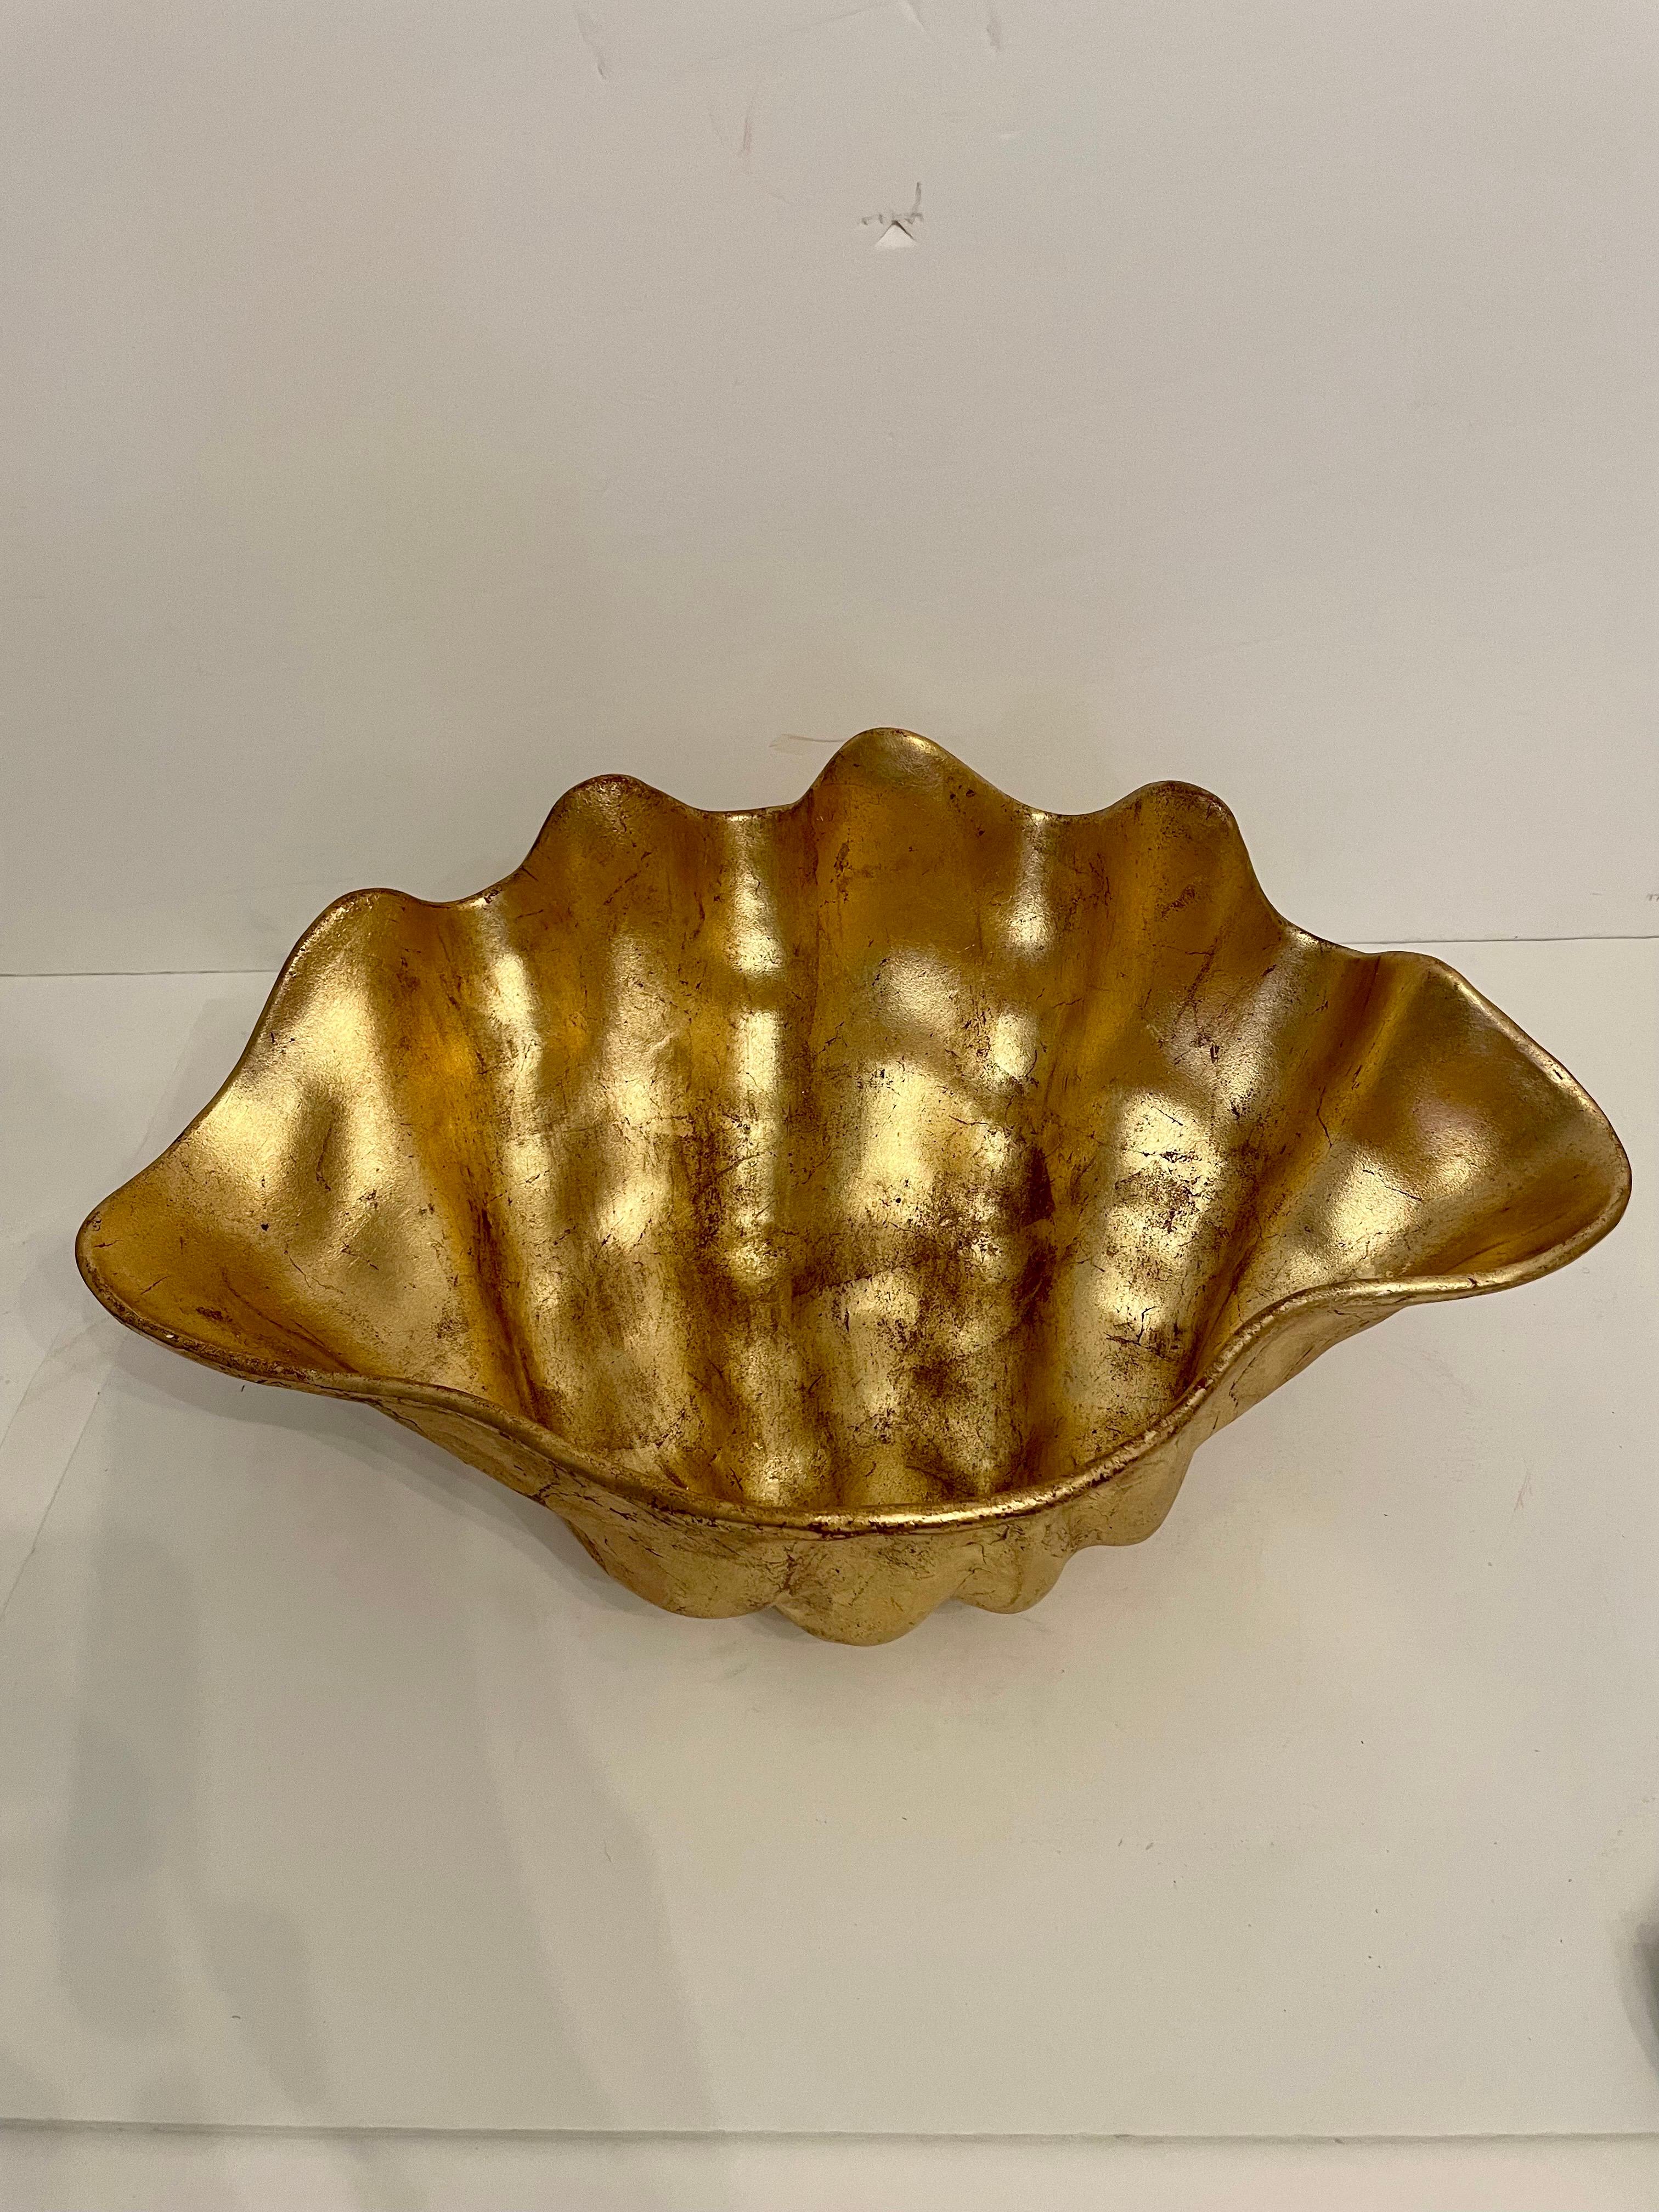 Large Hollywood Regency vintage gilt finish sea shell bowl. Nicely detailed. Good condition with some patina from age and use. Measures 18 